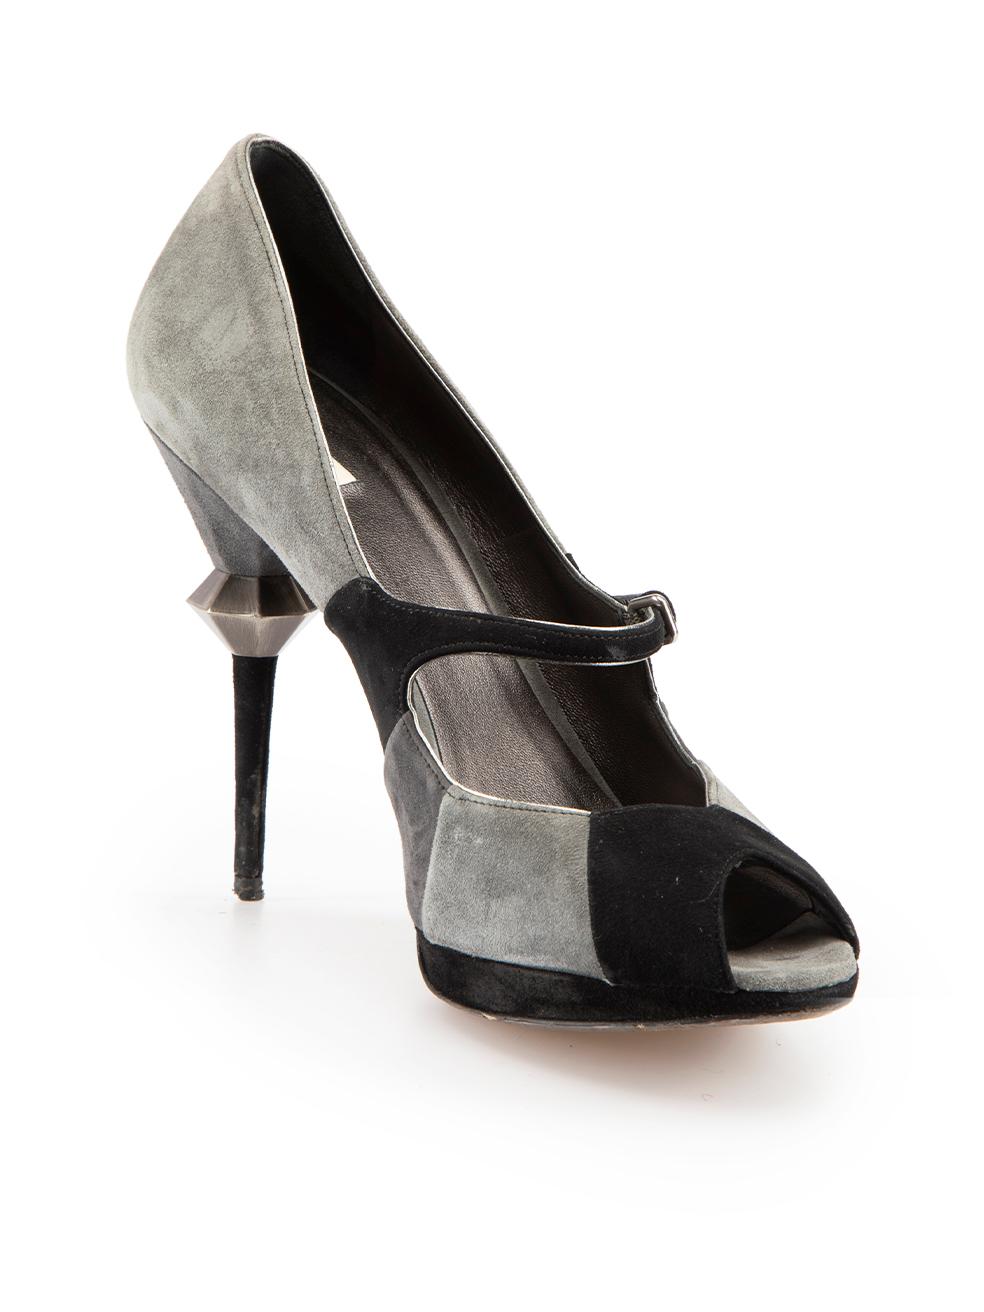 CONDITION is Good. Minor wear to shoes is evident. Light wear to both sides and heels of both shoes with abrasions, marks and indents to the leather on this used Miu Miu designer resale item.
 
Details
Grey
Suede
Heels
Black suede panels and